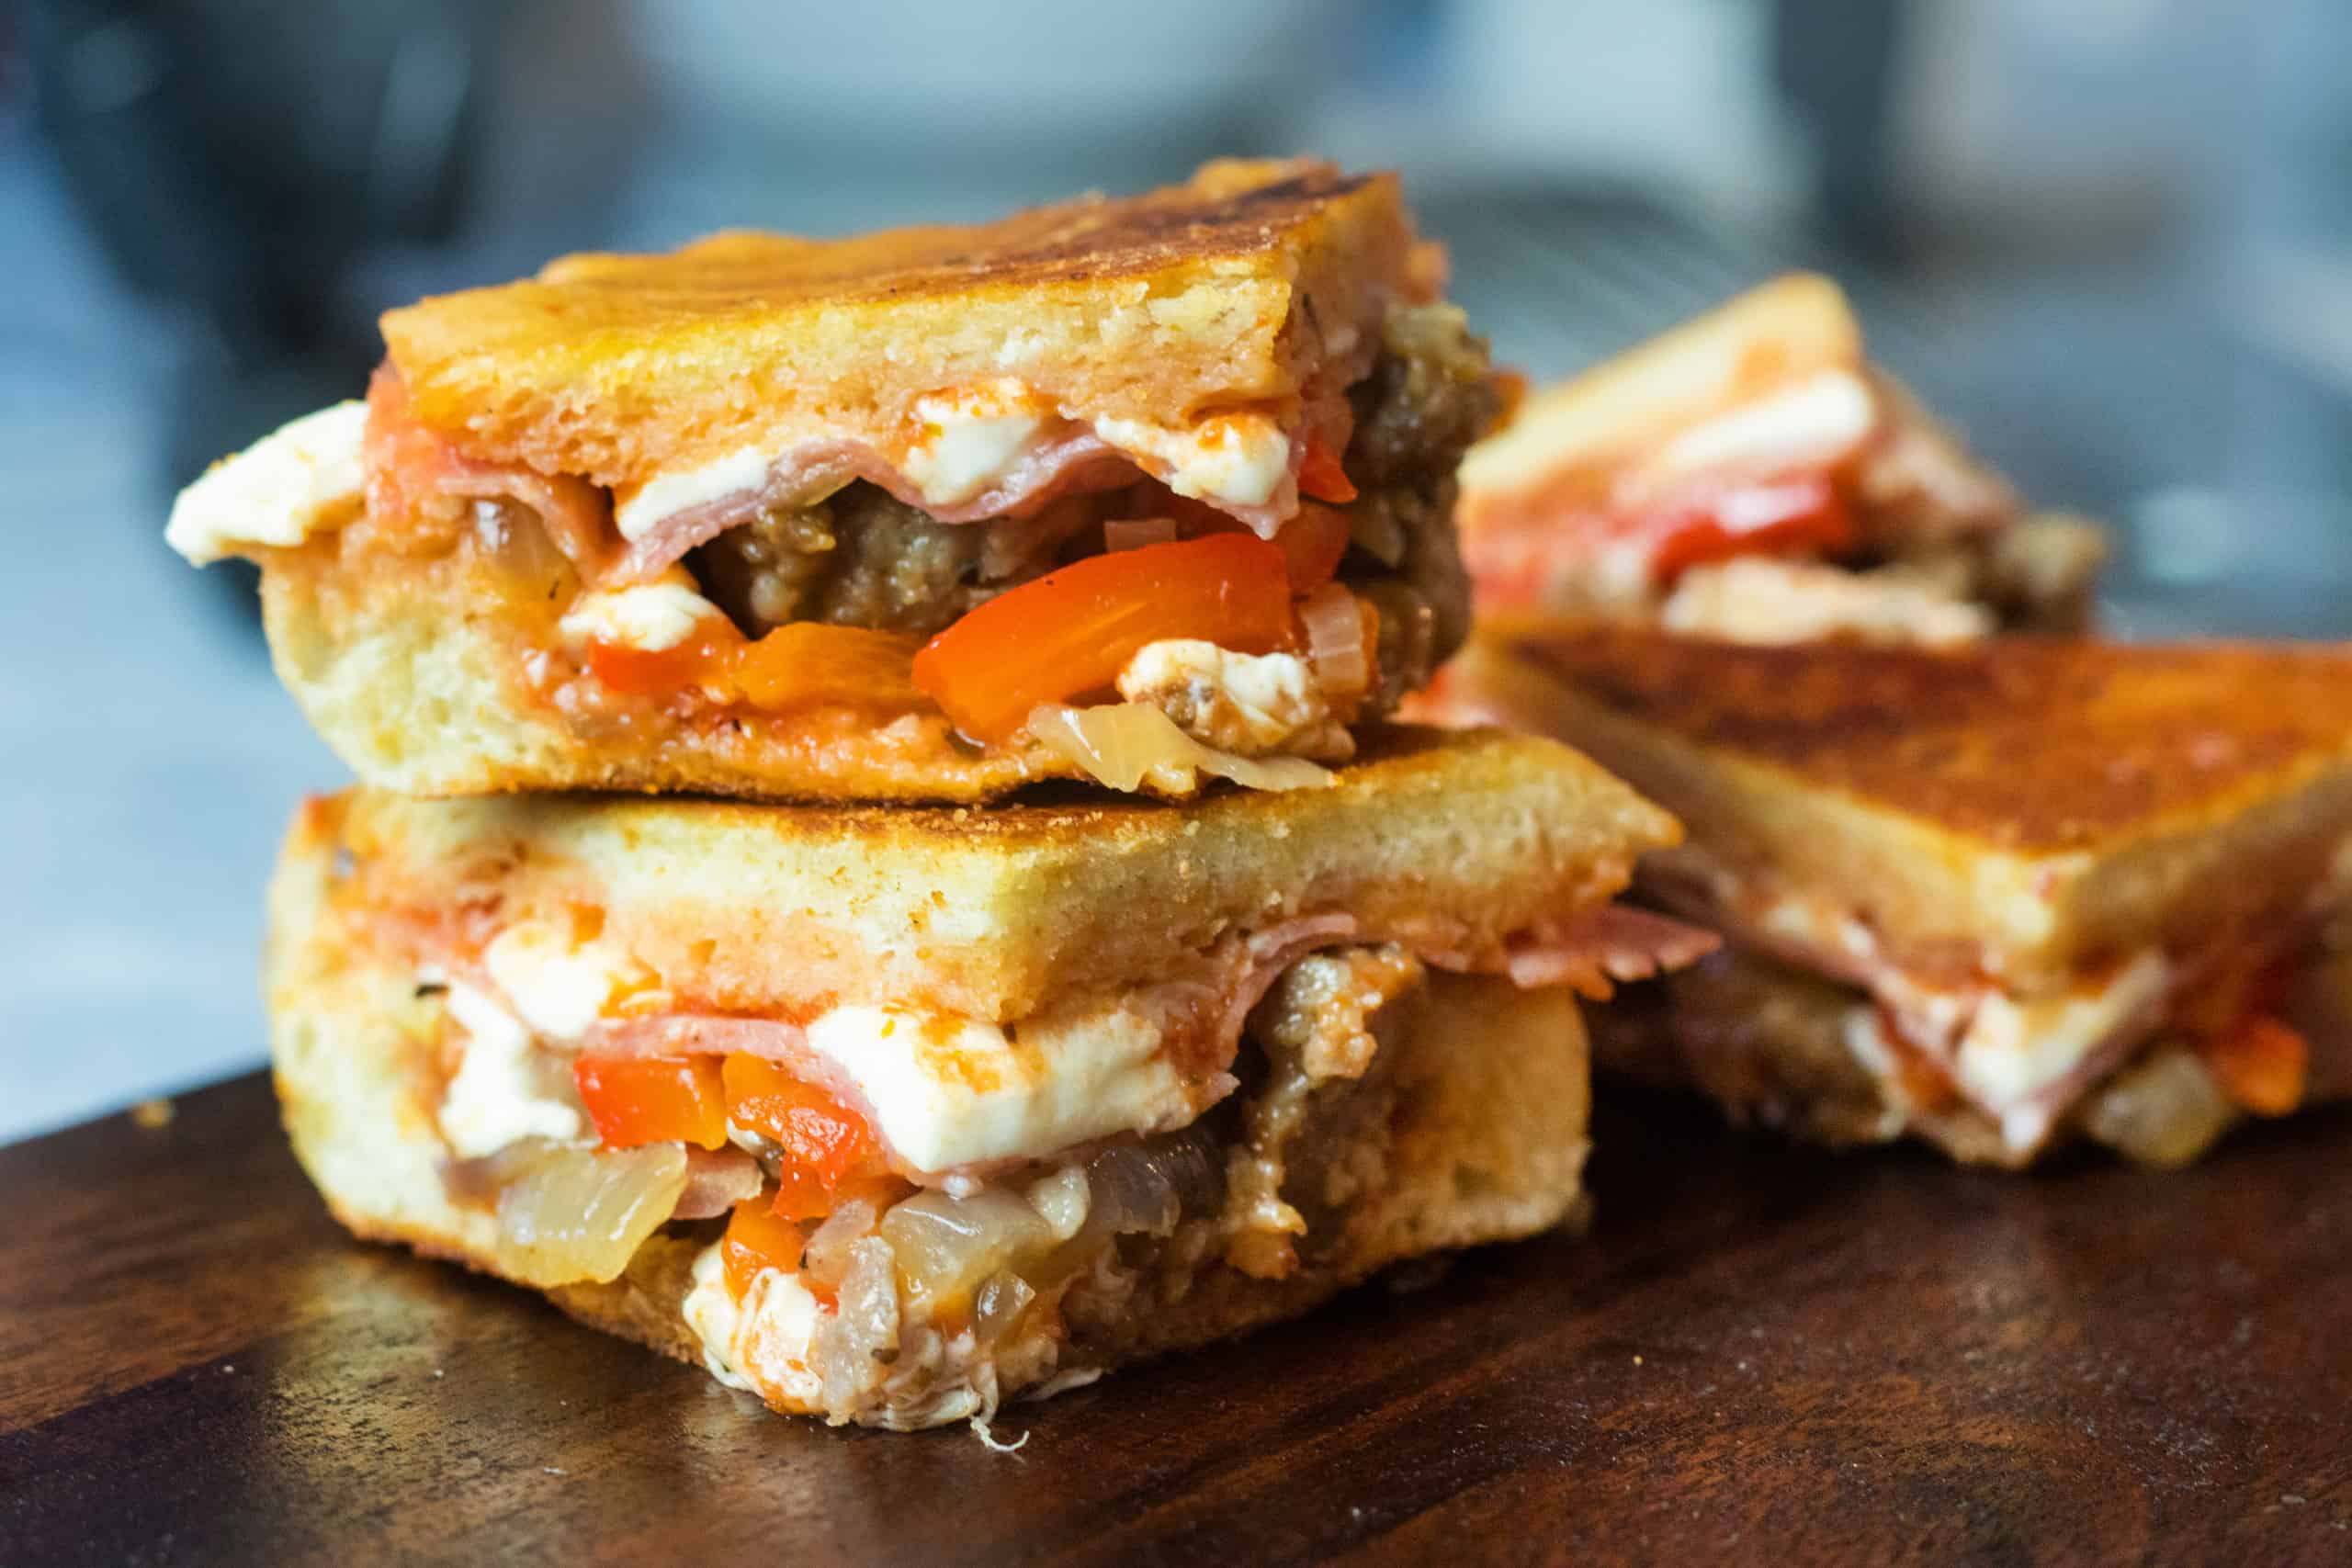 Grilled Italian Panini with Hormel Pepperoni